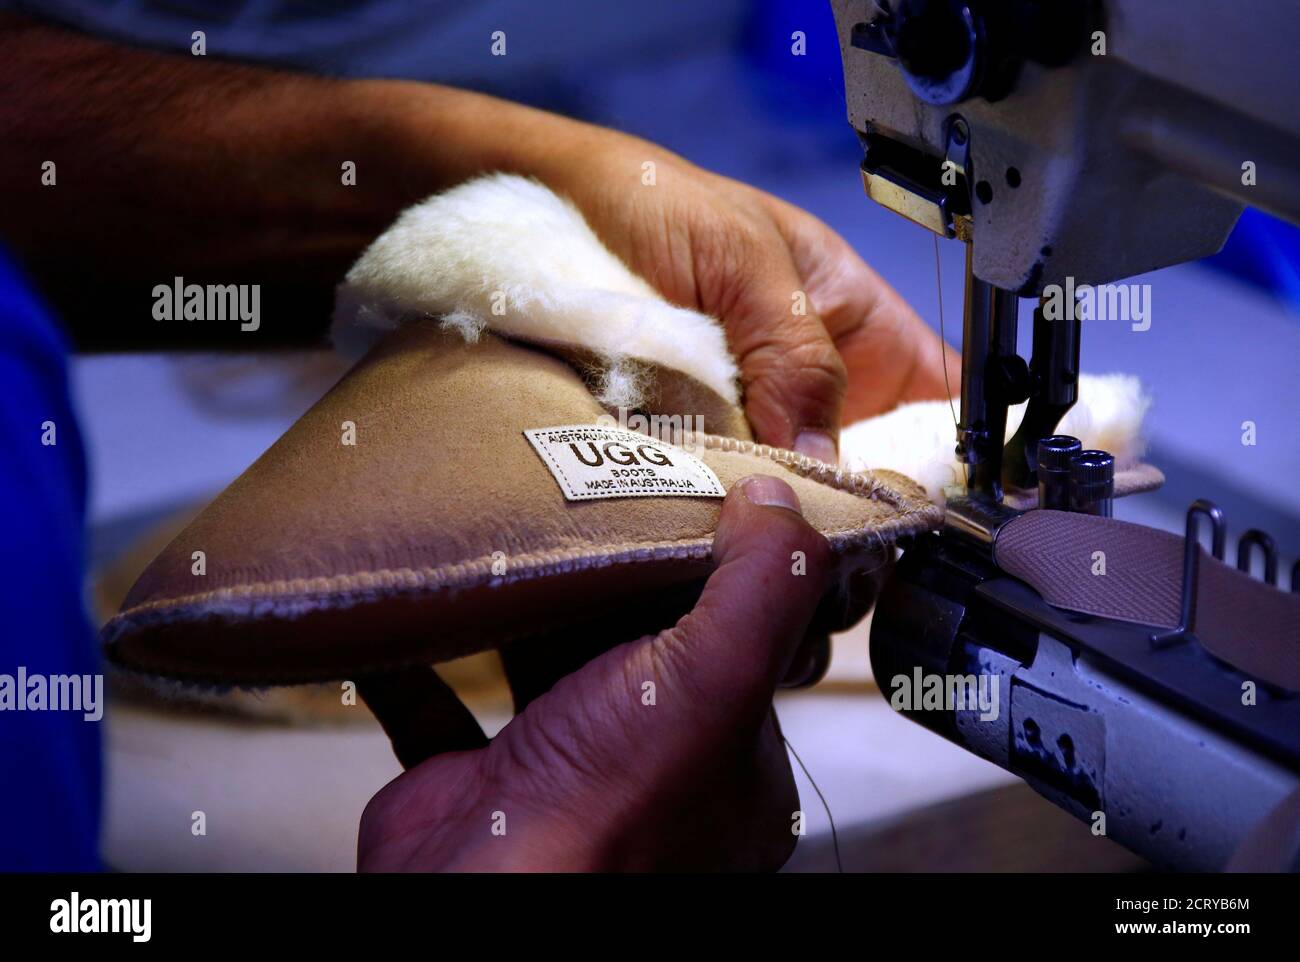 A worker uses a sewing machine at a factory making counterfeit sheep-skin  Ugg boots in western Sydney, Australia, October 26, 2016 as they produce  products for numerous orders for customers in China.